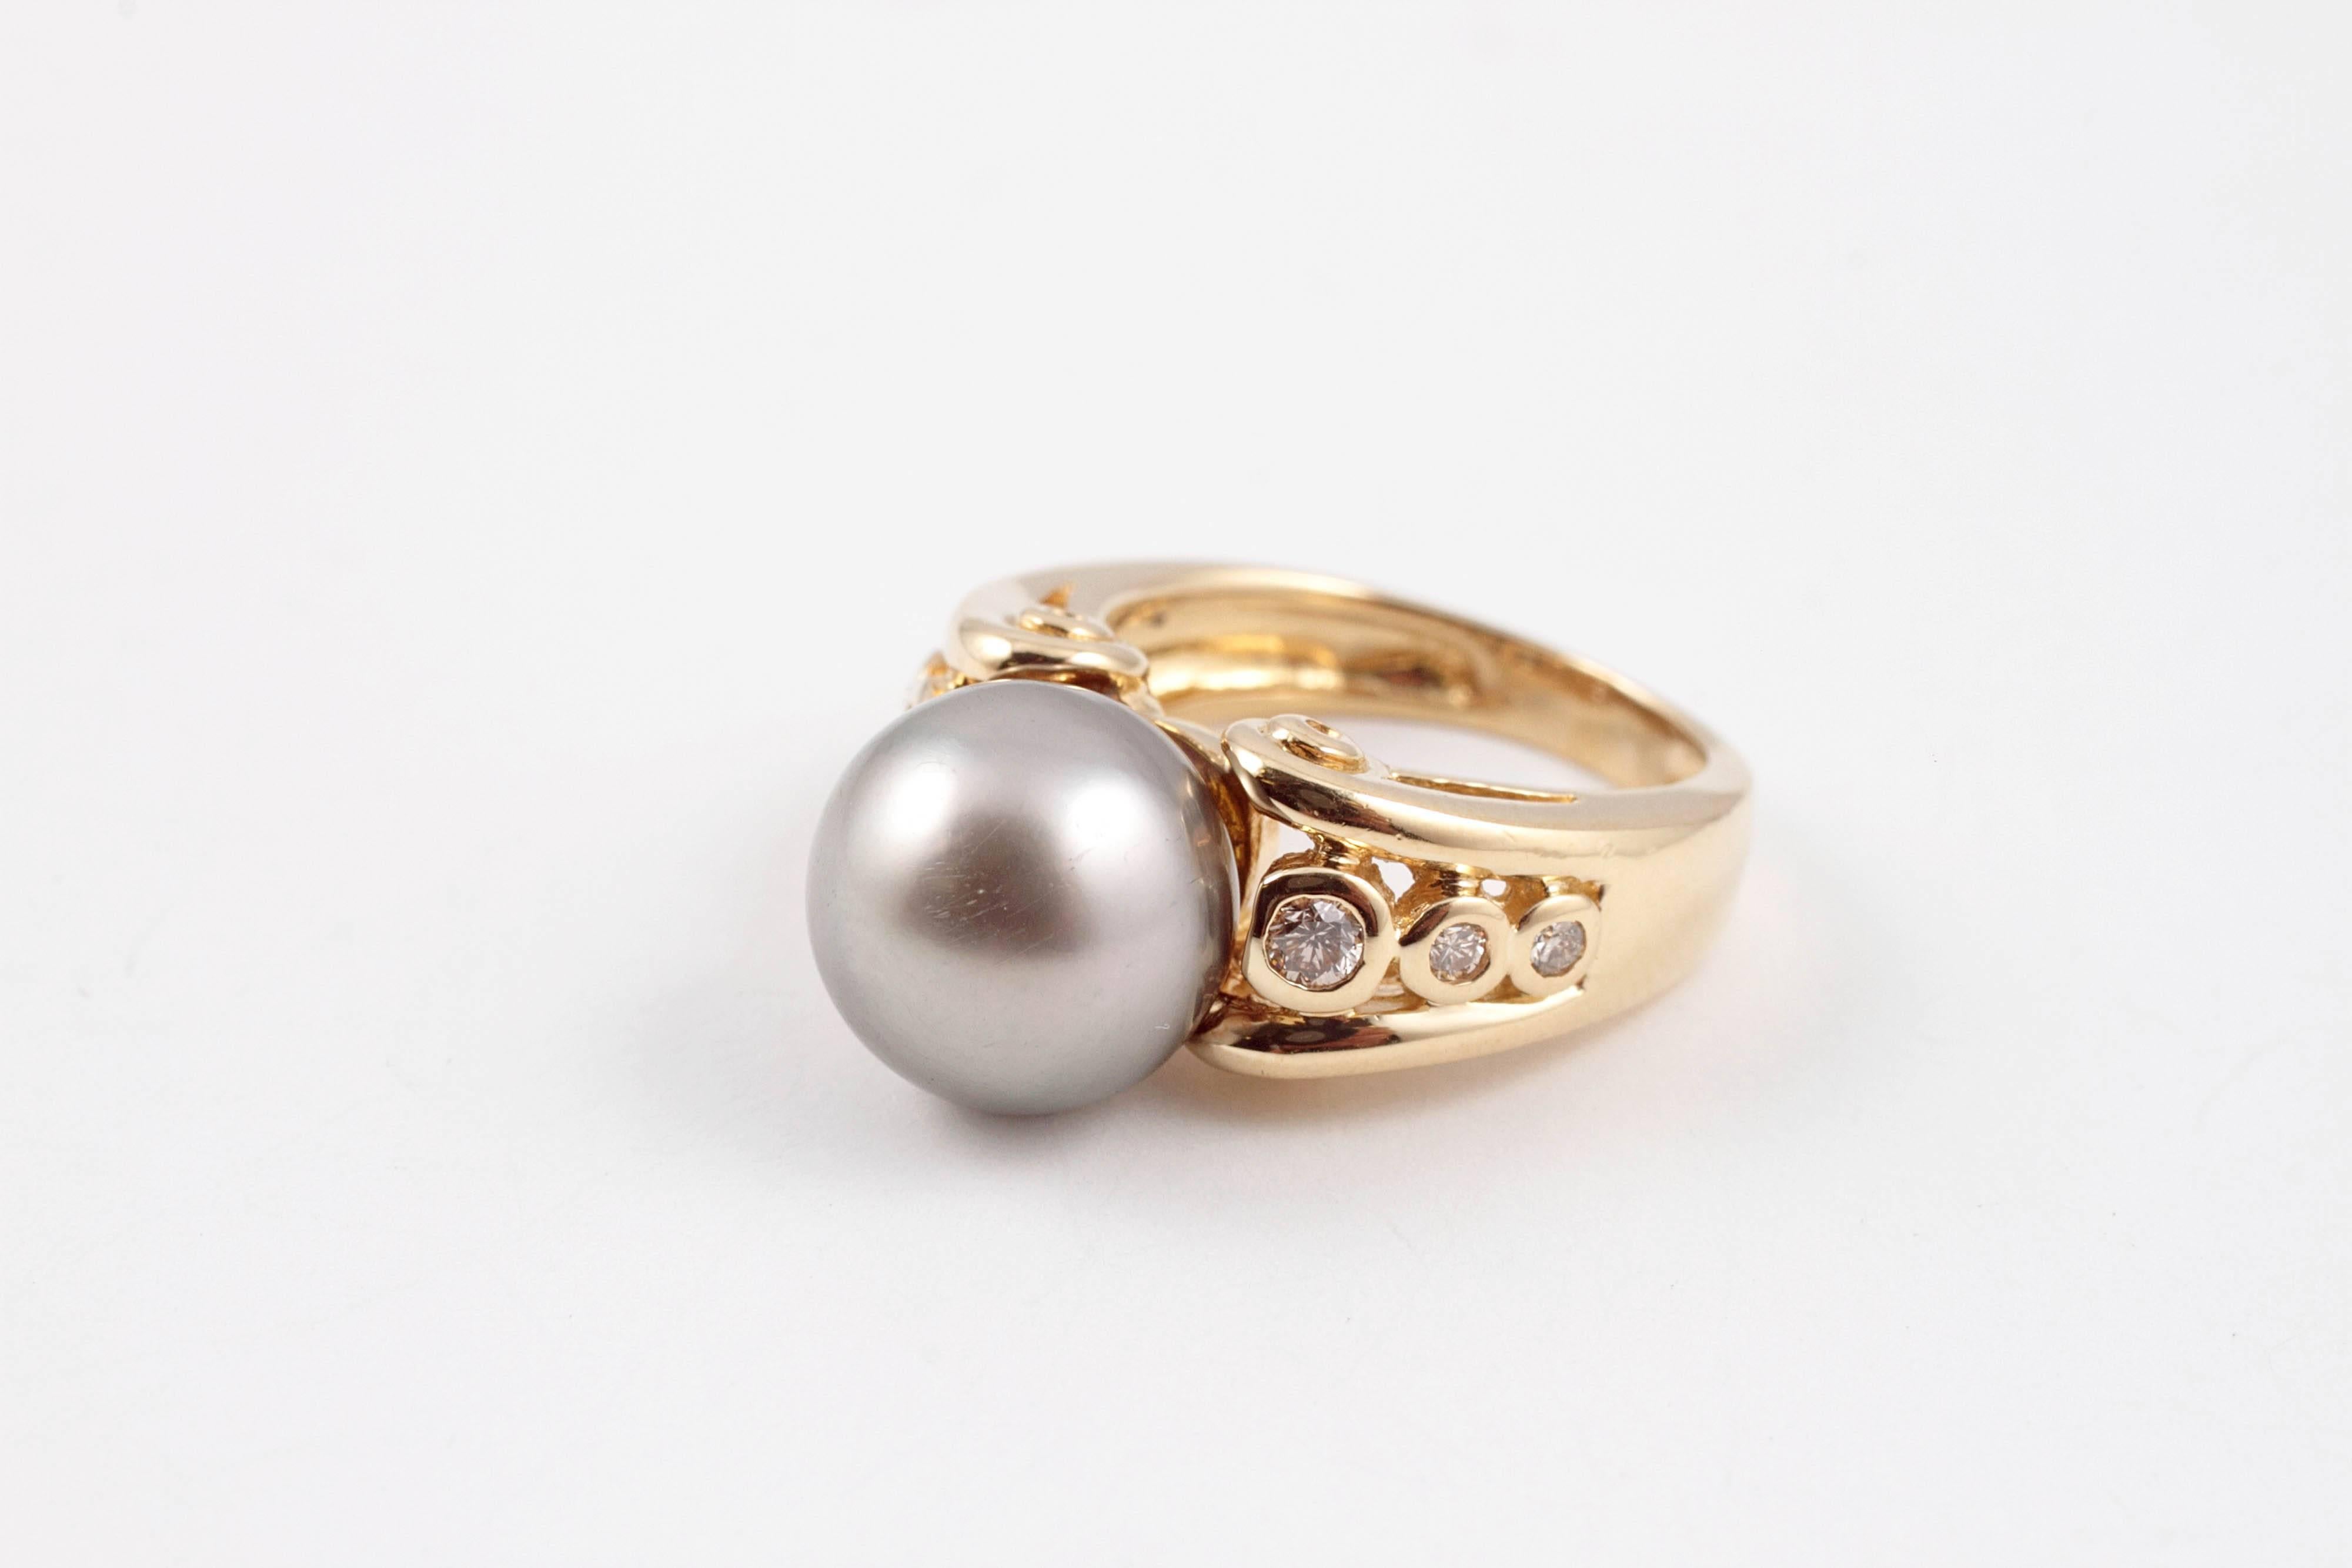 Fabulous ring!  In 18 karat yellow gold, this 11.00 mm natural color Tahitian cultured pearl is flanked by diamonds and looks incredible on the hand!  In size 5 3/4.